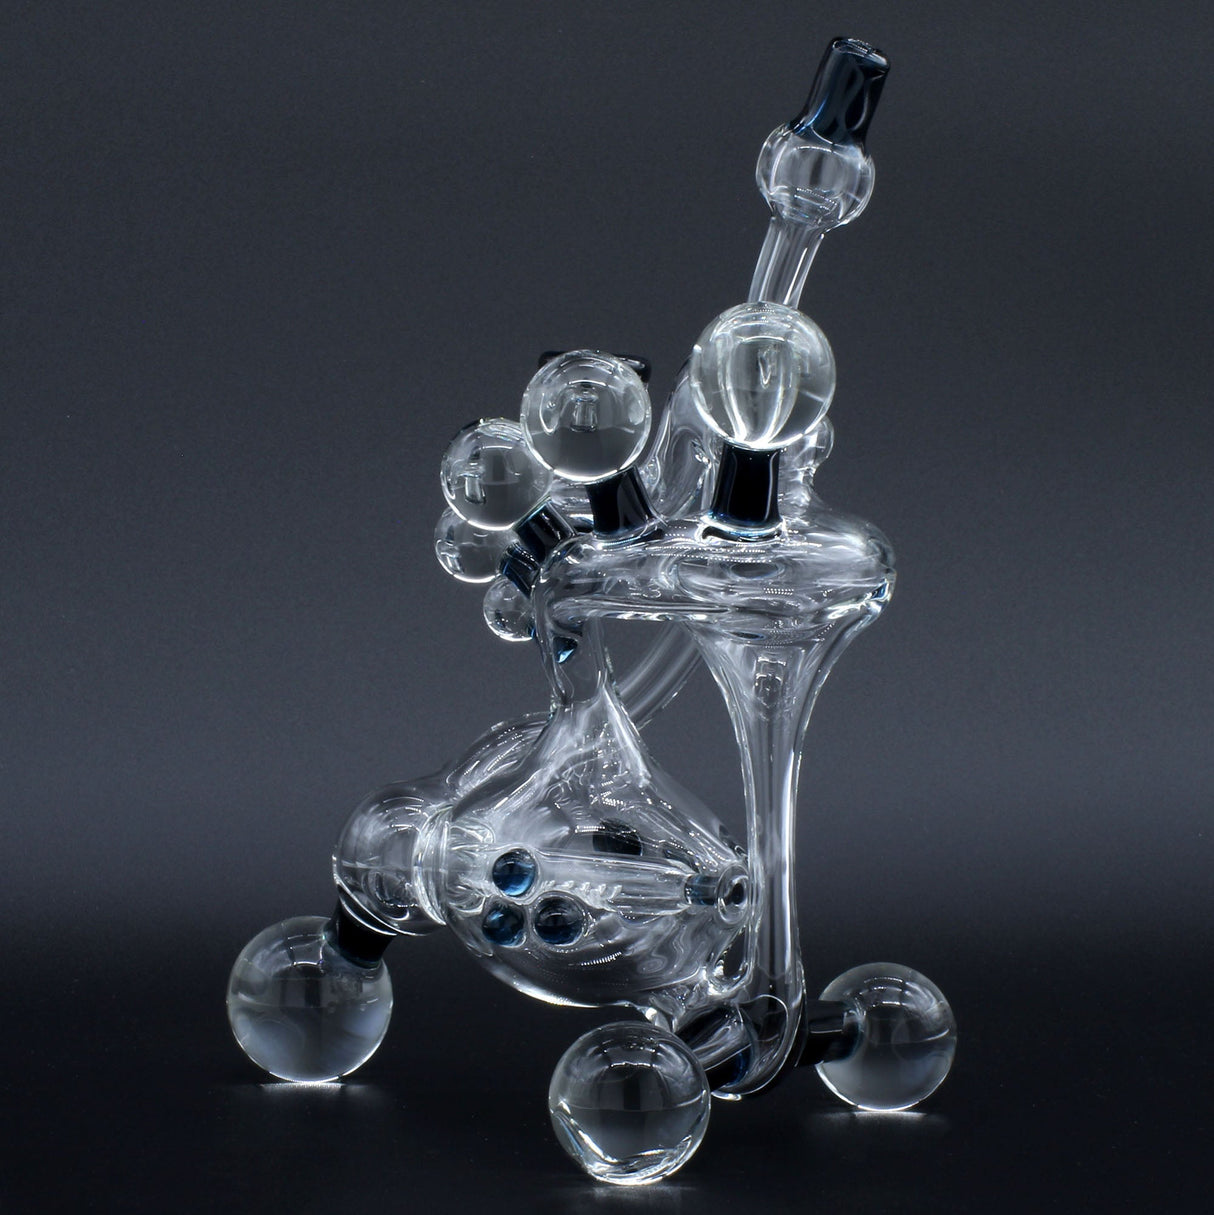 Clayball Glass "Electric Moon" Heady Recycler Dab-Rig, intricate USA-made borosilicate design